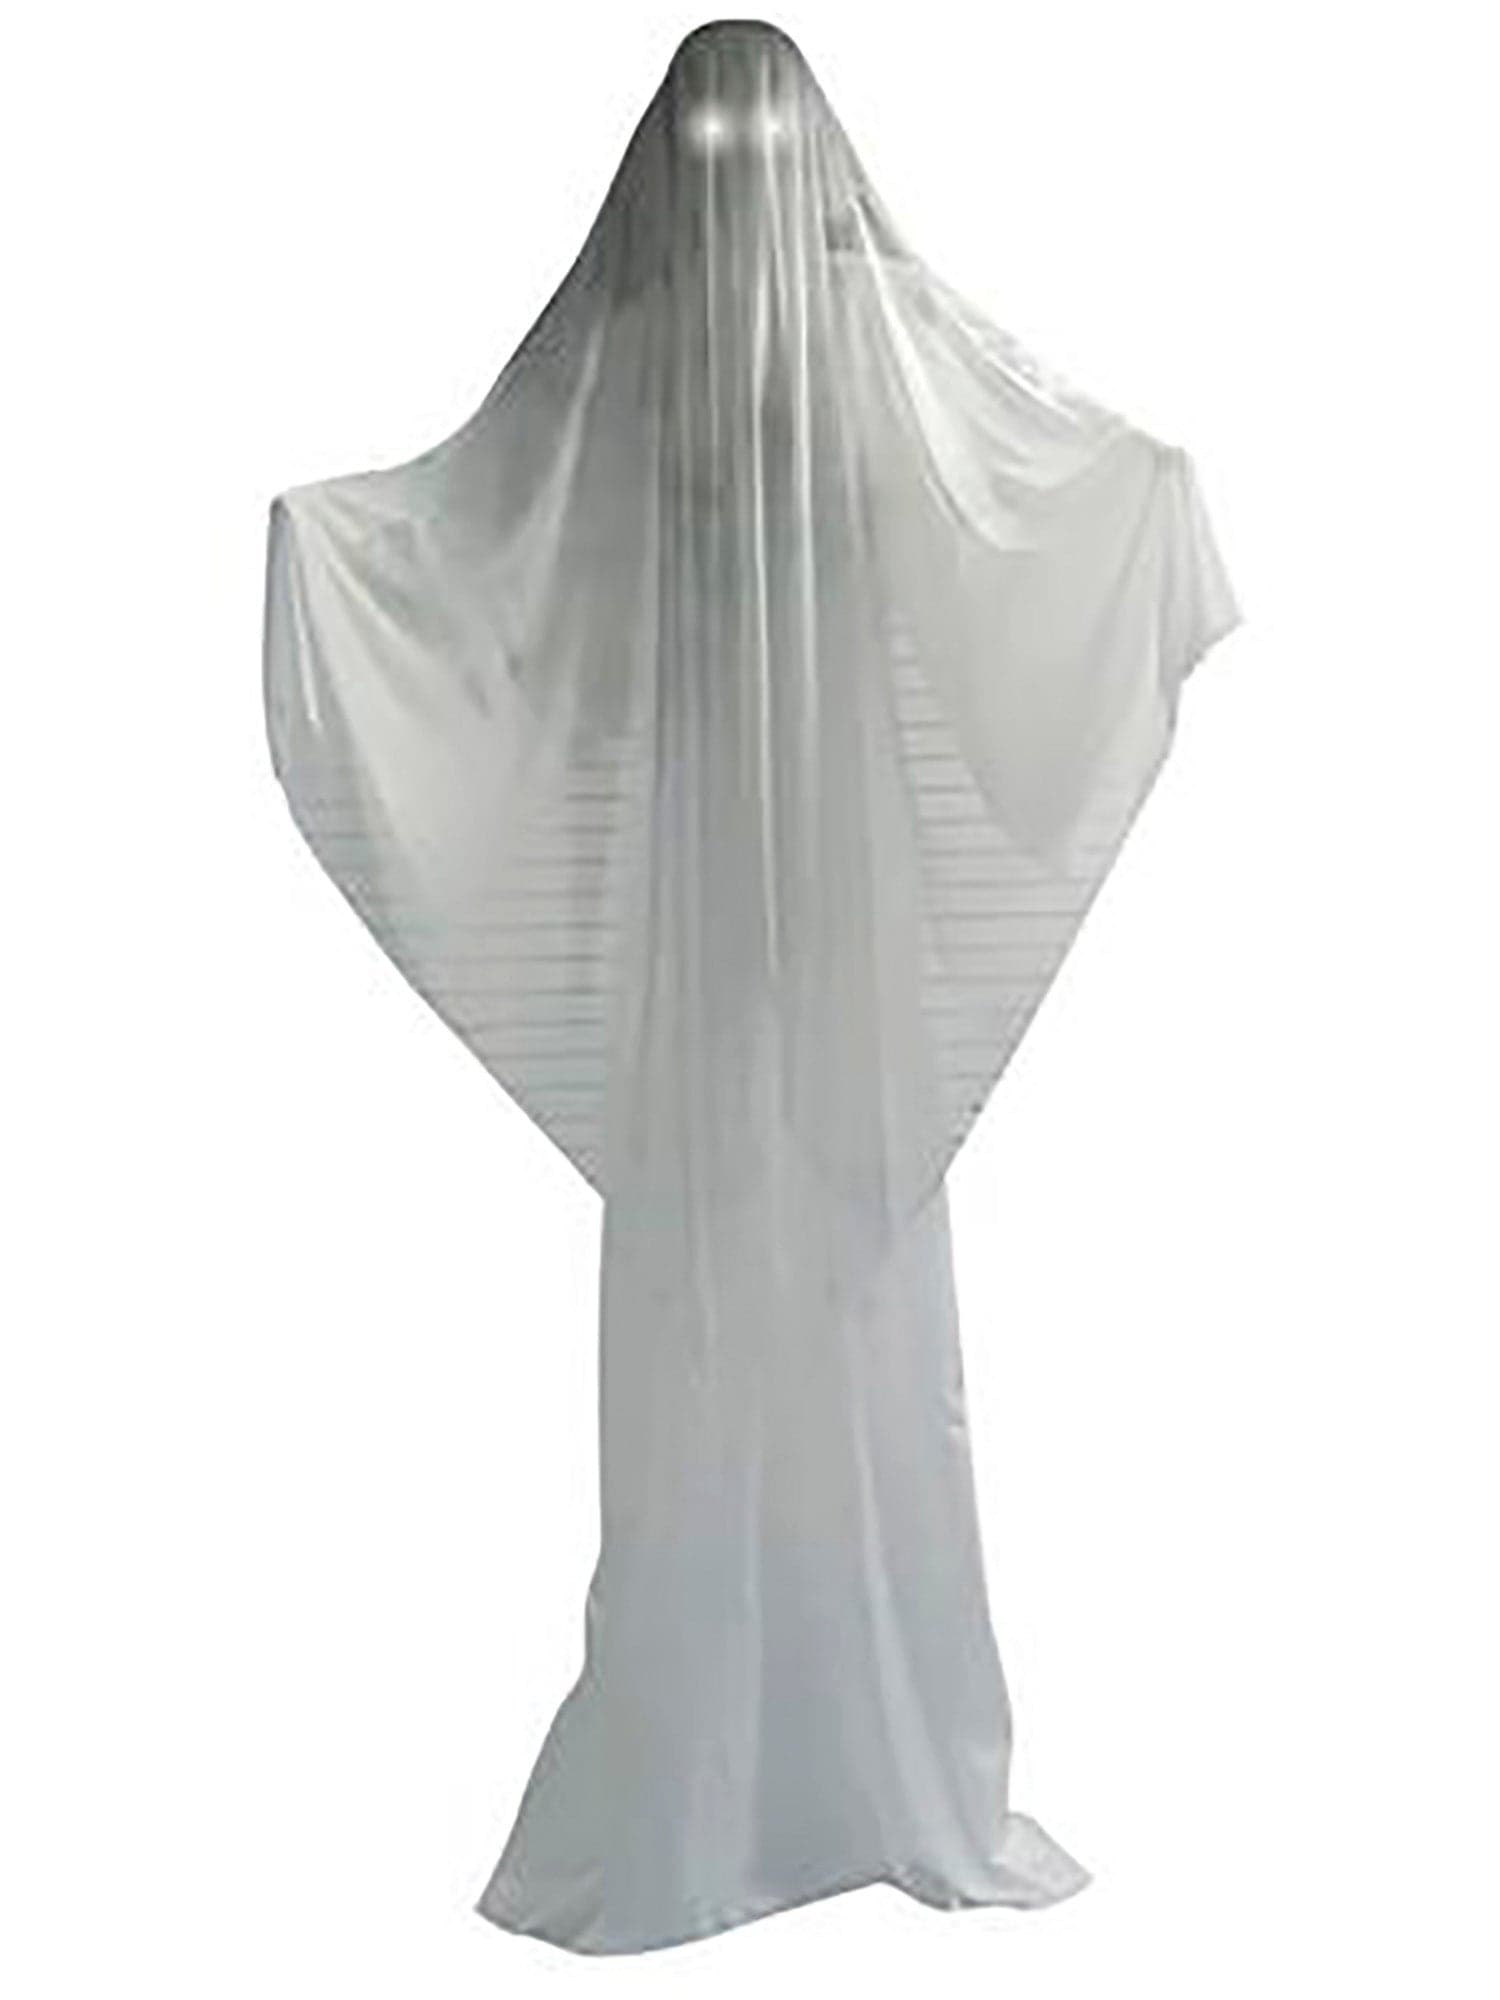 12 Foot Ghostly Reaper Light Up Animated Prop - costumes.com